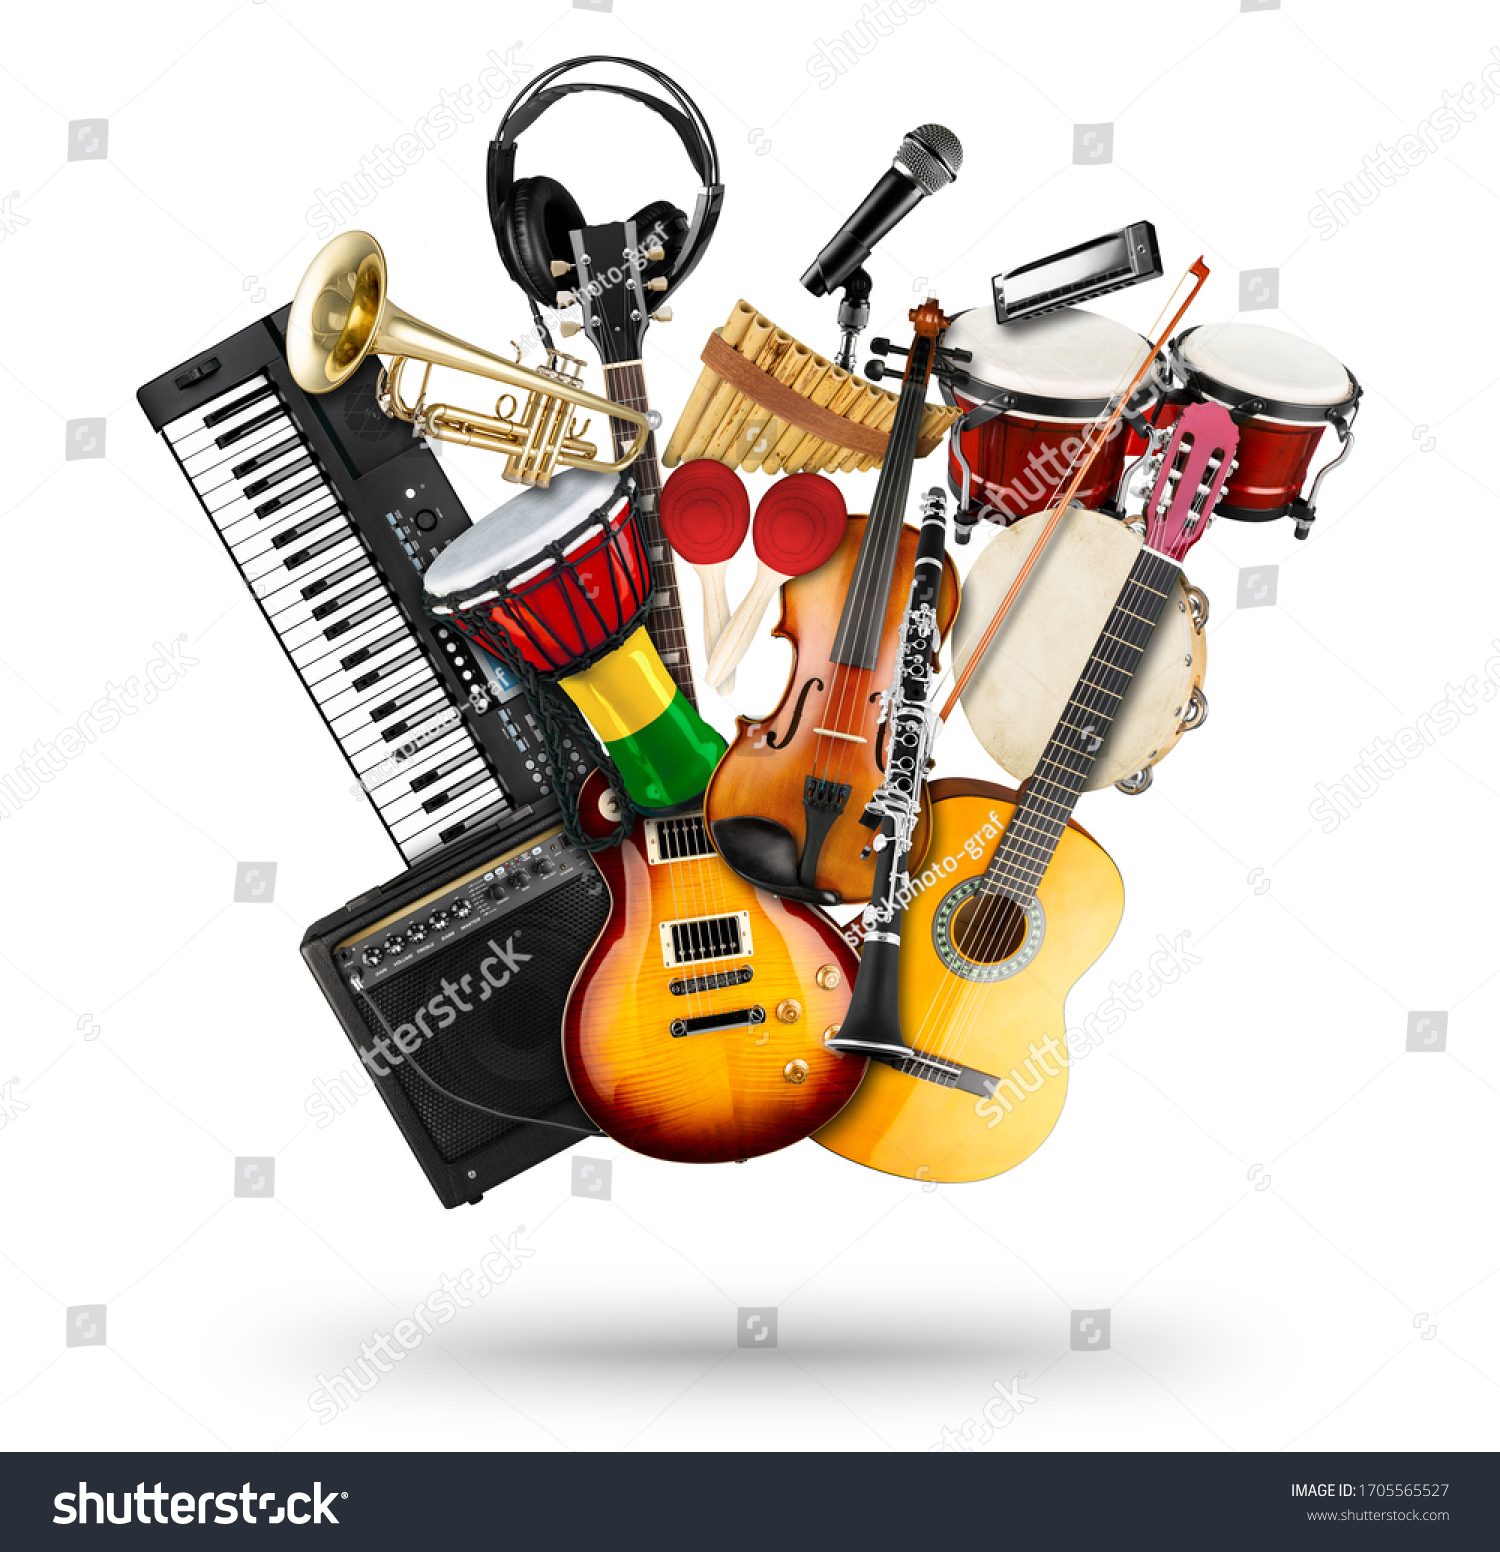 stack pile collage of various musical instruments. Electric guitar violin piano keyboard bongo drums tamburin harmonica trumpet. Brass percussion studio music concept isolated on white background #1705565527